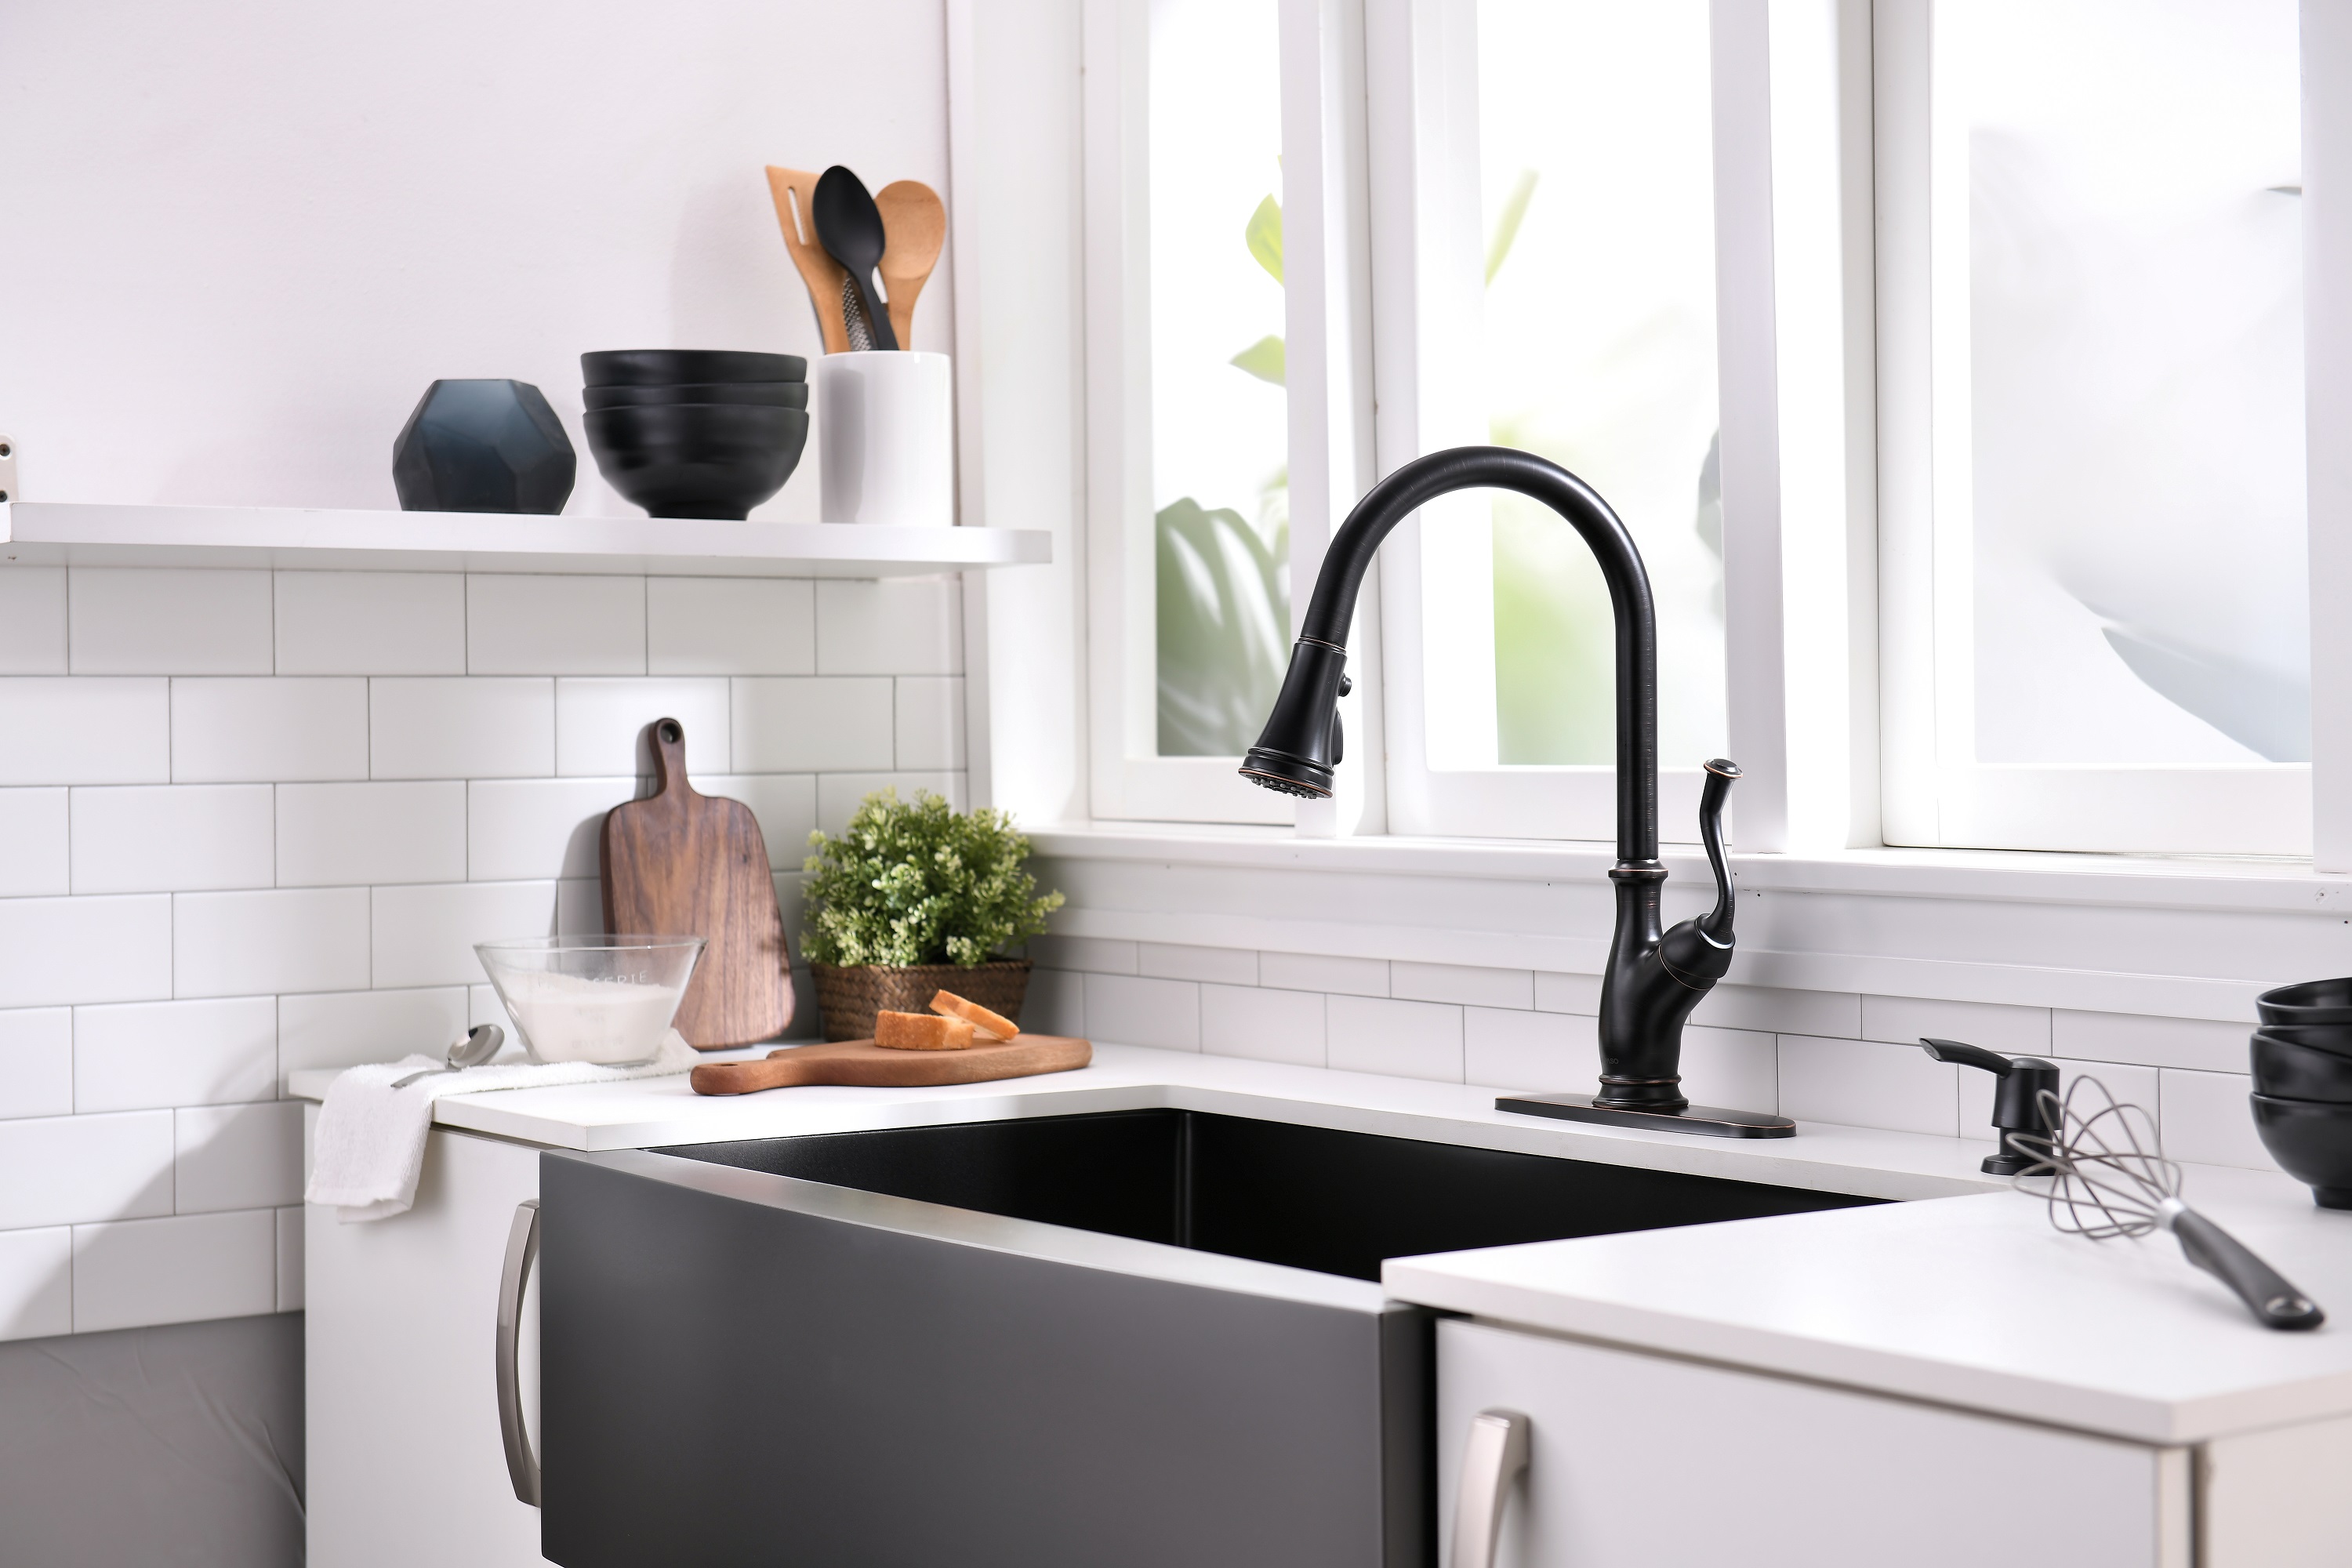 APS175-ORB How to use the 3 Function Kitchen Faucet：Power clean, spray, and stream with ease.JPG